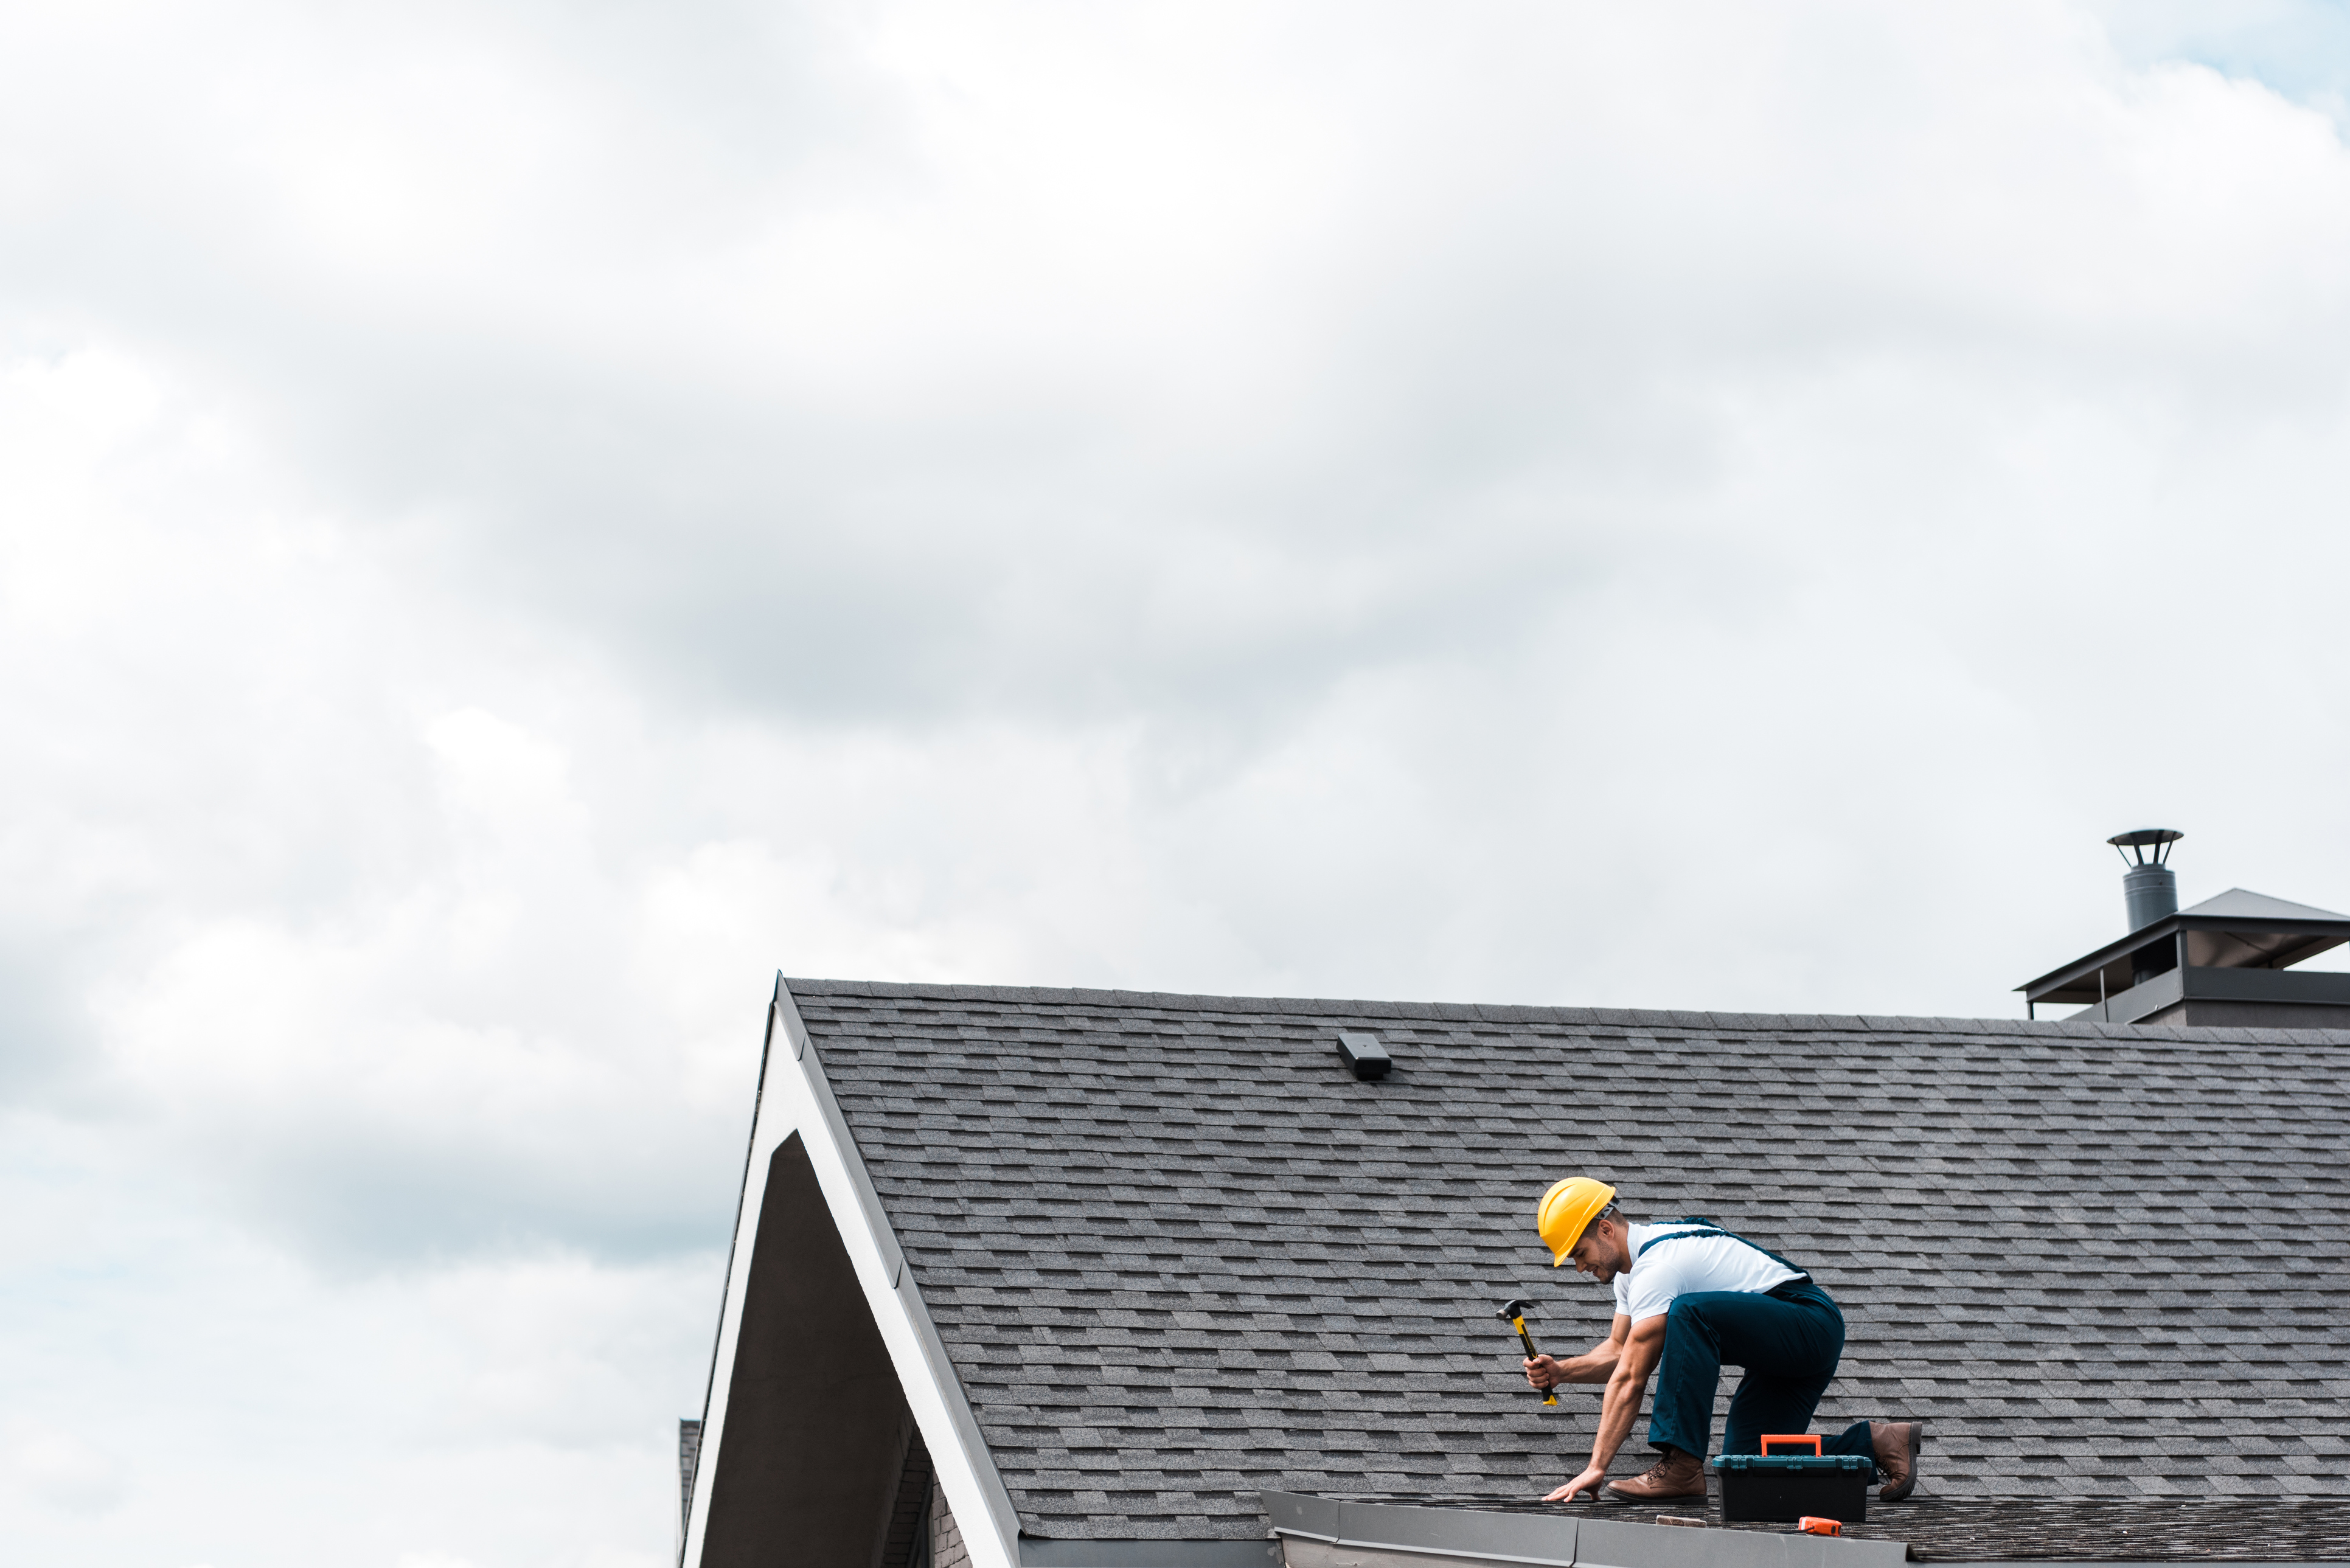 If you are searching for roof repair in the greater Lexington area, look no further than Thomas Quality Construction.